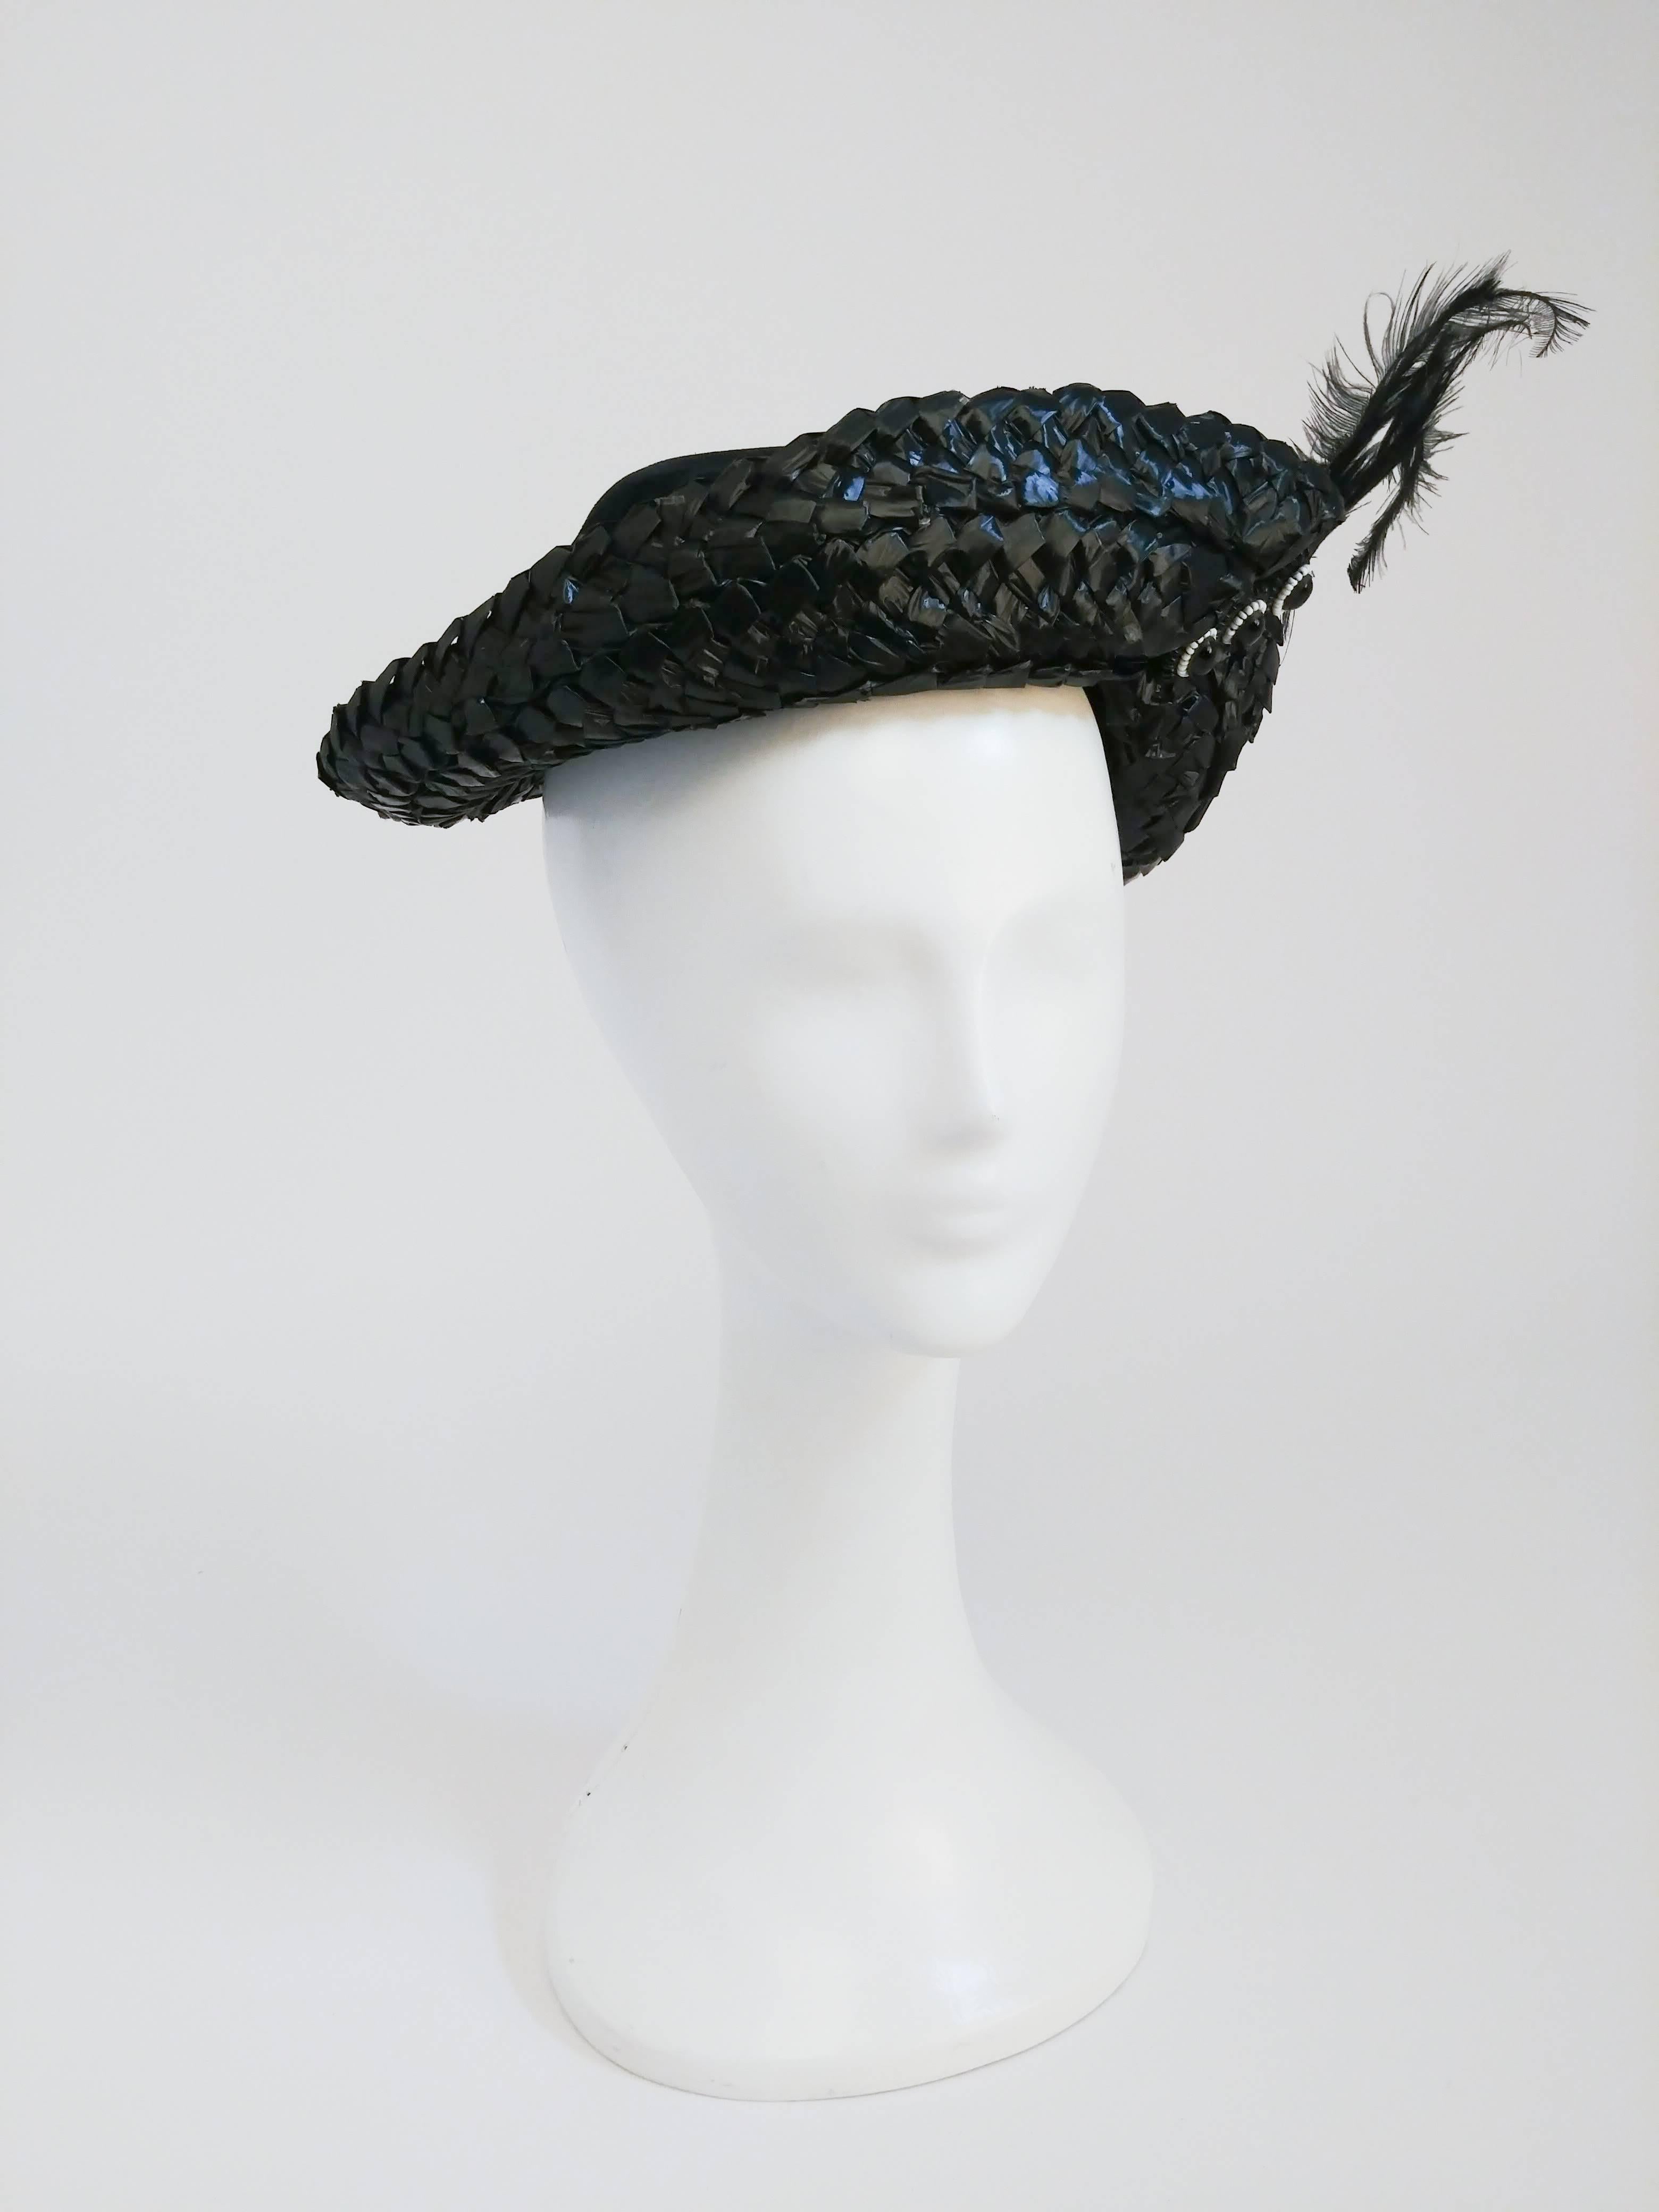 1930's Black Silk Velvet and Raffia Hat. Black silk velvet hat with raffia brim, glass bead and feather embellishments. Elastic band to secure hat to head. 22 inch circumference.